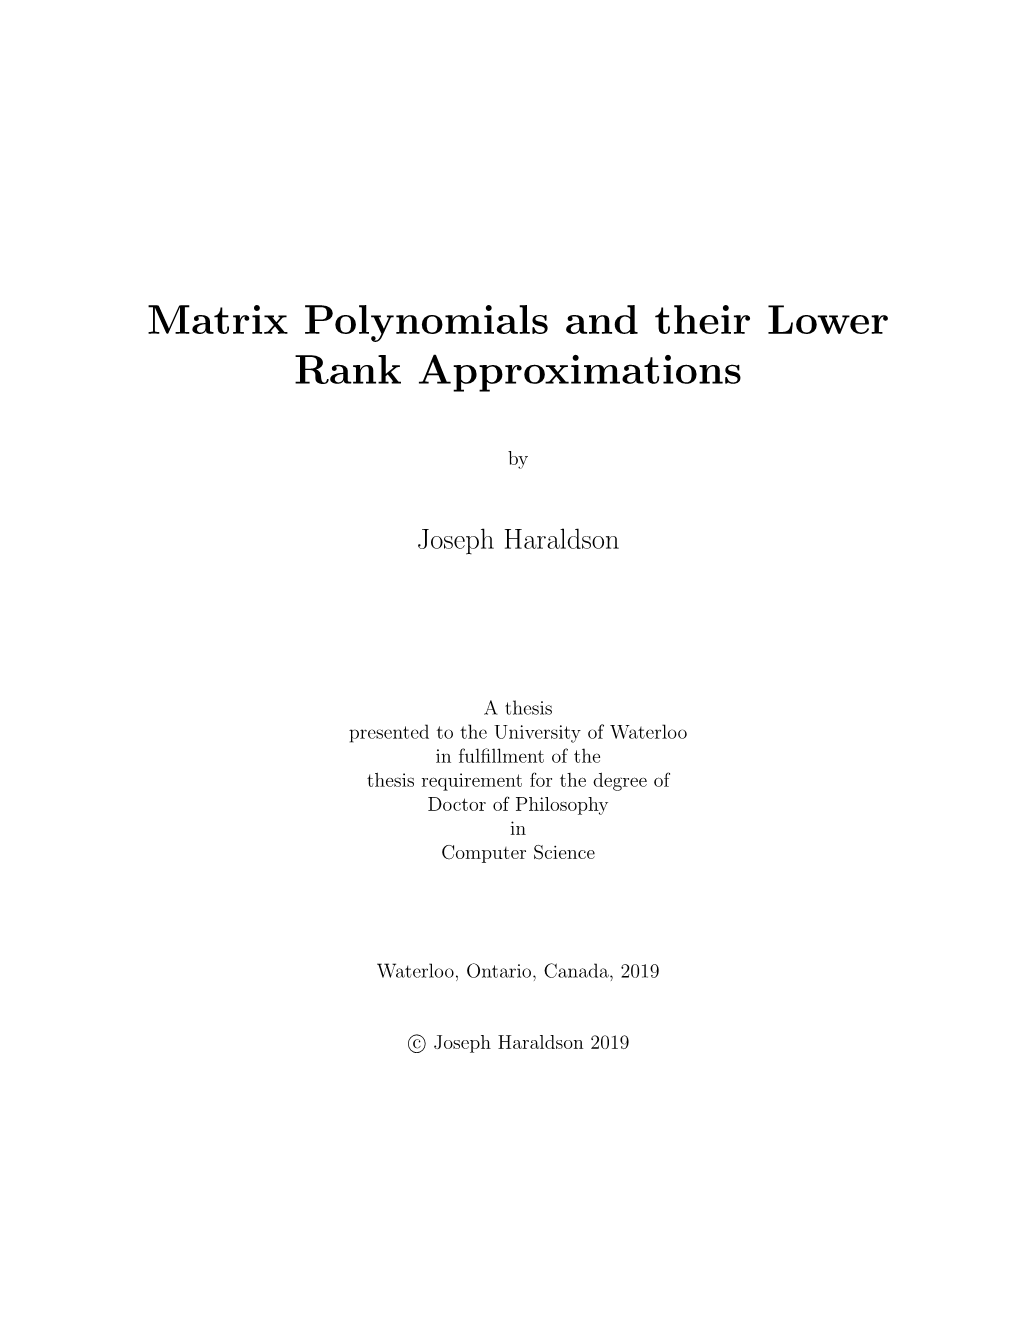 Matrix Polynomials and Their Lower Rank Approximations